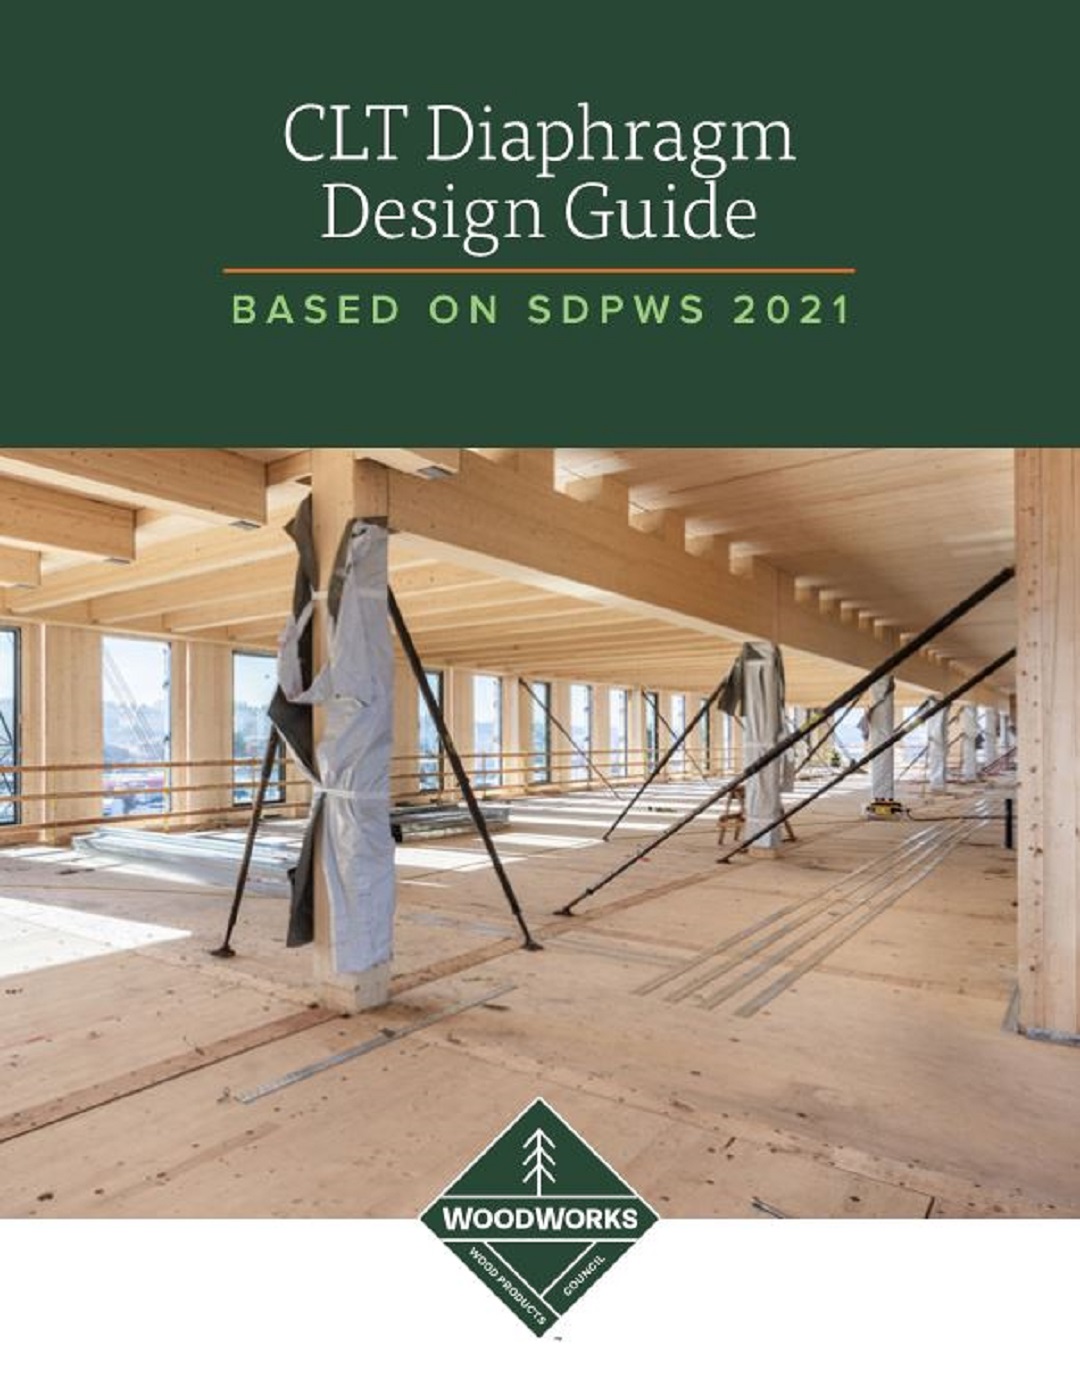 CLT Diaphragm Design Guide Cover by WoodWorks